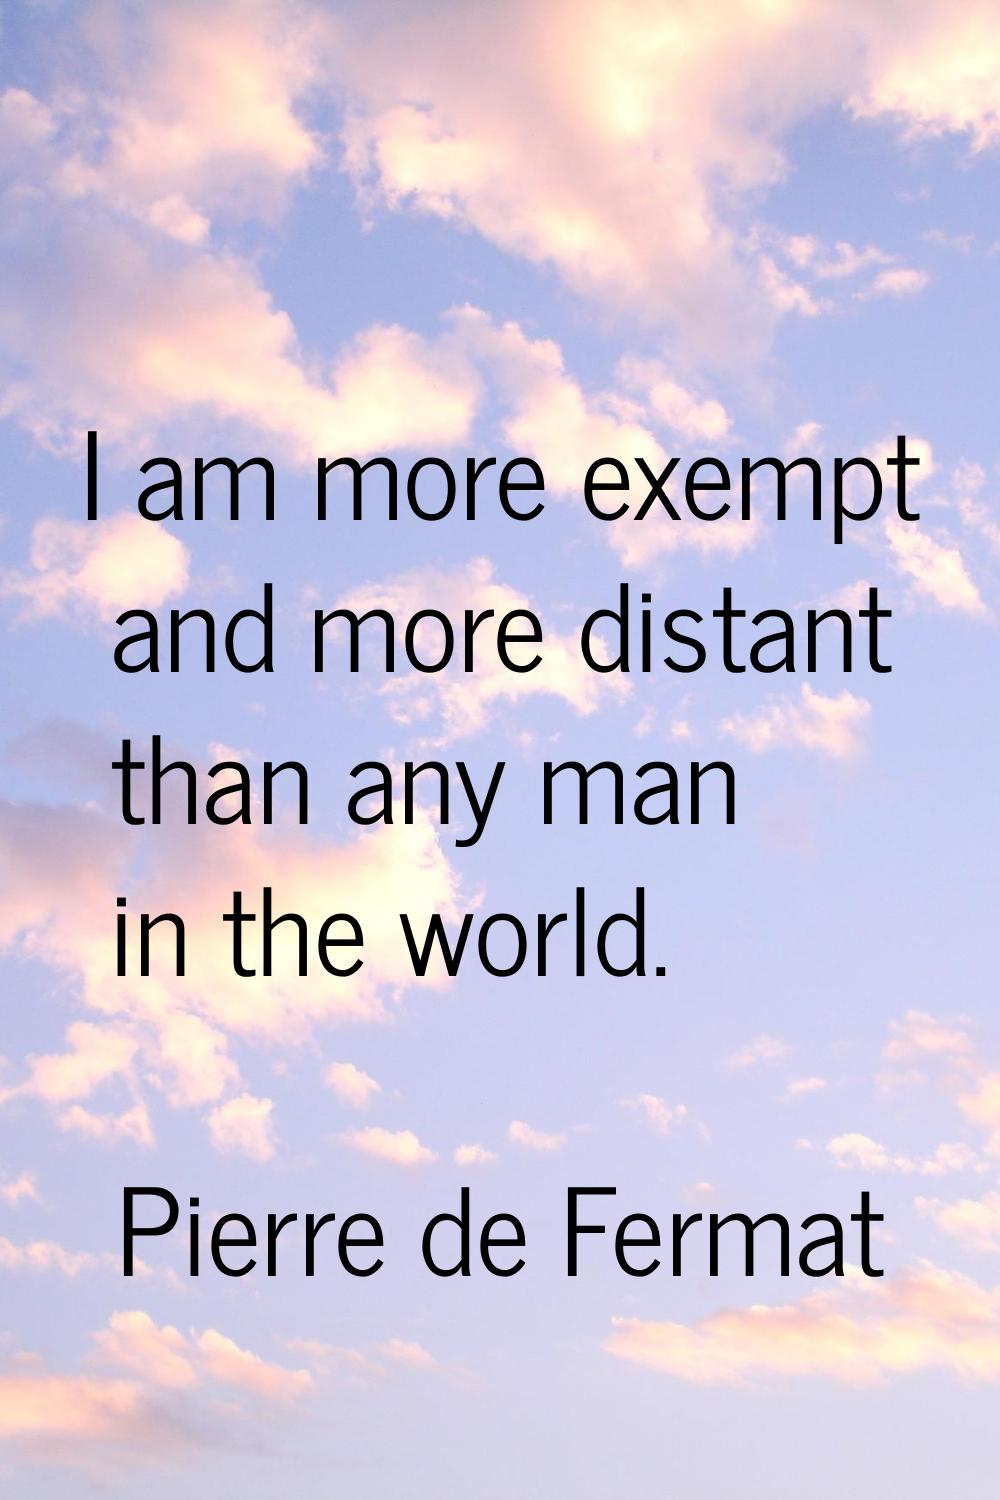 I am more exempt and more distant than any man in the world.